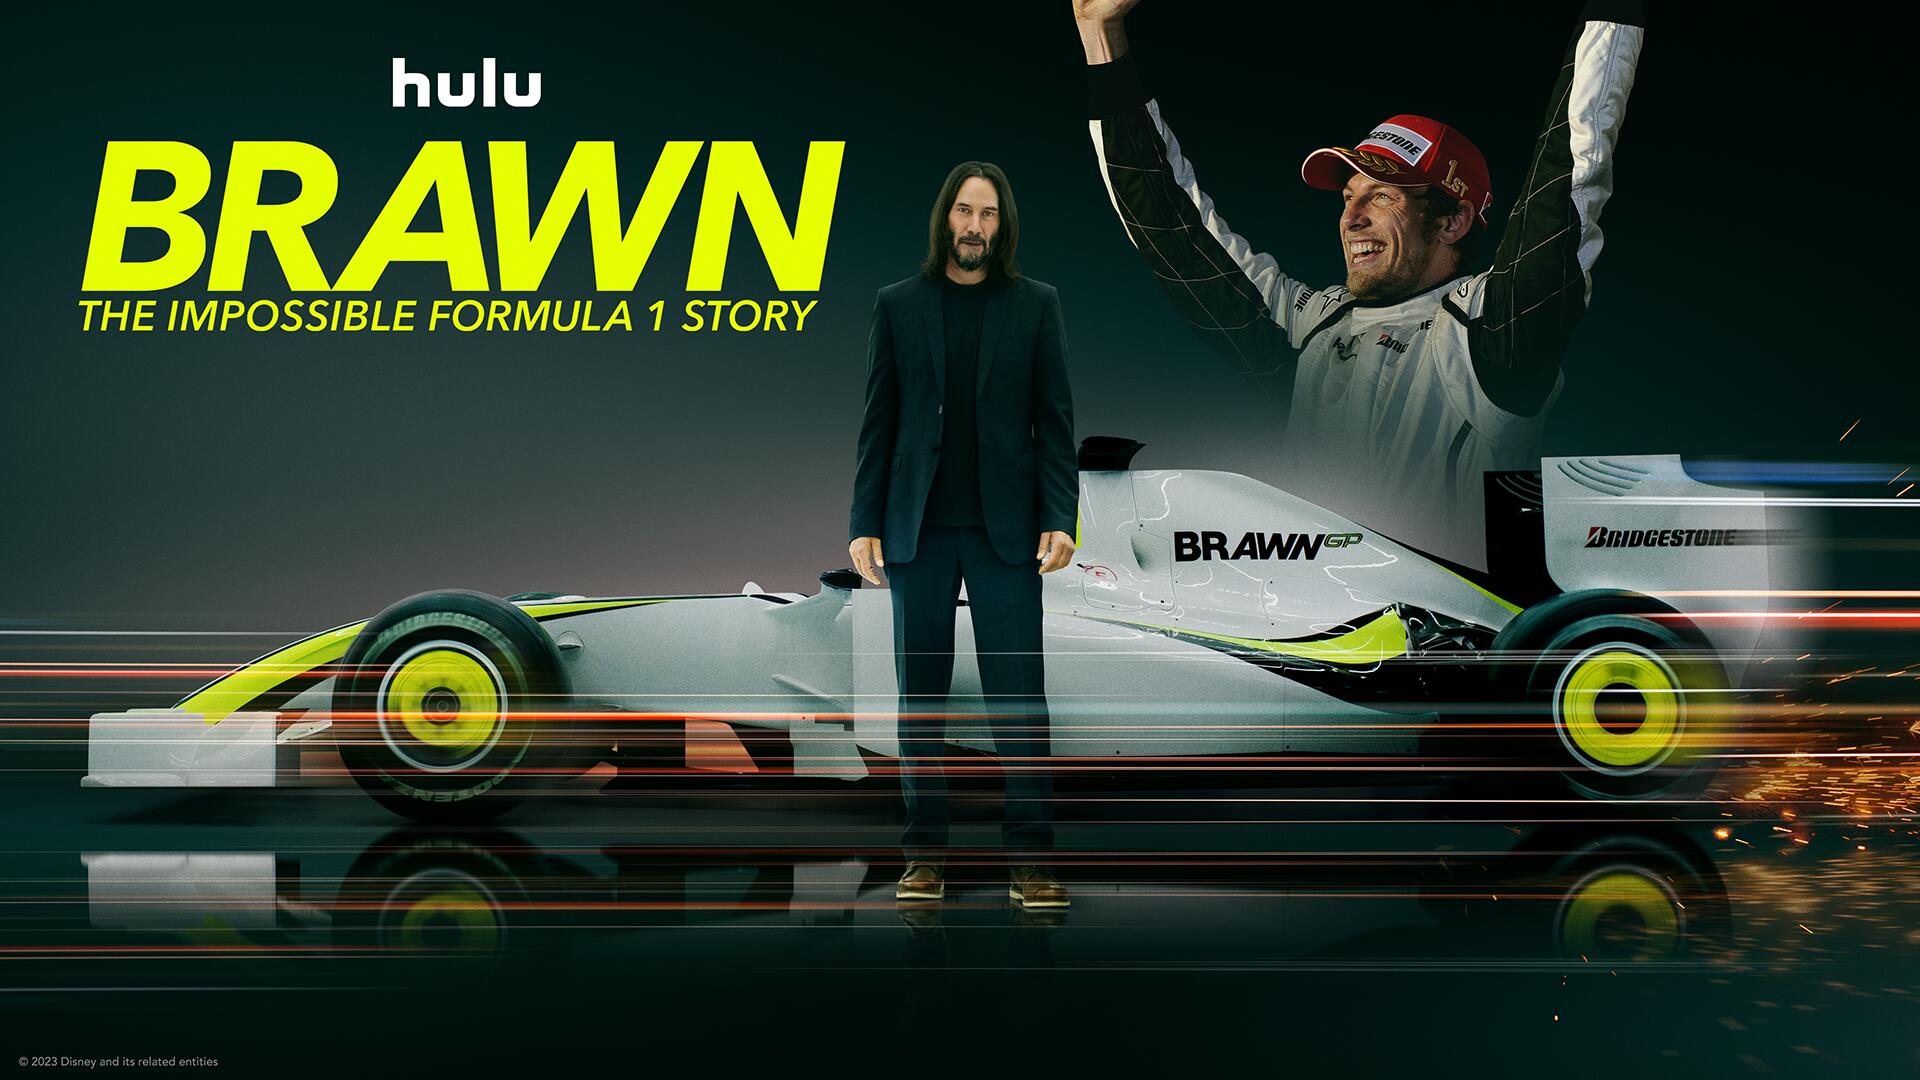 Brawn: The Impossible Formula 1 Story -- This brand-new unscripted four-part documentary series with Keanu Reeves (“John Wick,” “The Matrix Resurrections”) tells the remarkable story of how, in 2009, competing in the most expensive and technologically advanced racing series on Earth, the impossible happened. An understaffed, underfinanced and independent team won the World Championship – with a team that cost just £1. Go behind the scenes of this Formula 1 fairytale with the people who were there – on the track, in the garage and the boardroom – giving their own thrilling versions of a miraculous year. Expect exclusive access to the F1 archives – much of it previously unseen – from a year that global sport will never forget, with contributions from British F1 driver Jenson Button and Ross Brawn, who led the team to victory.  (Courtesy of Hulu)